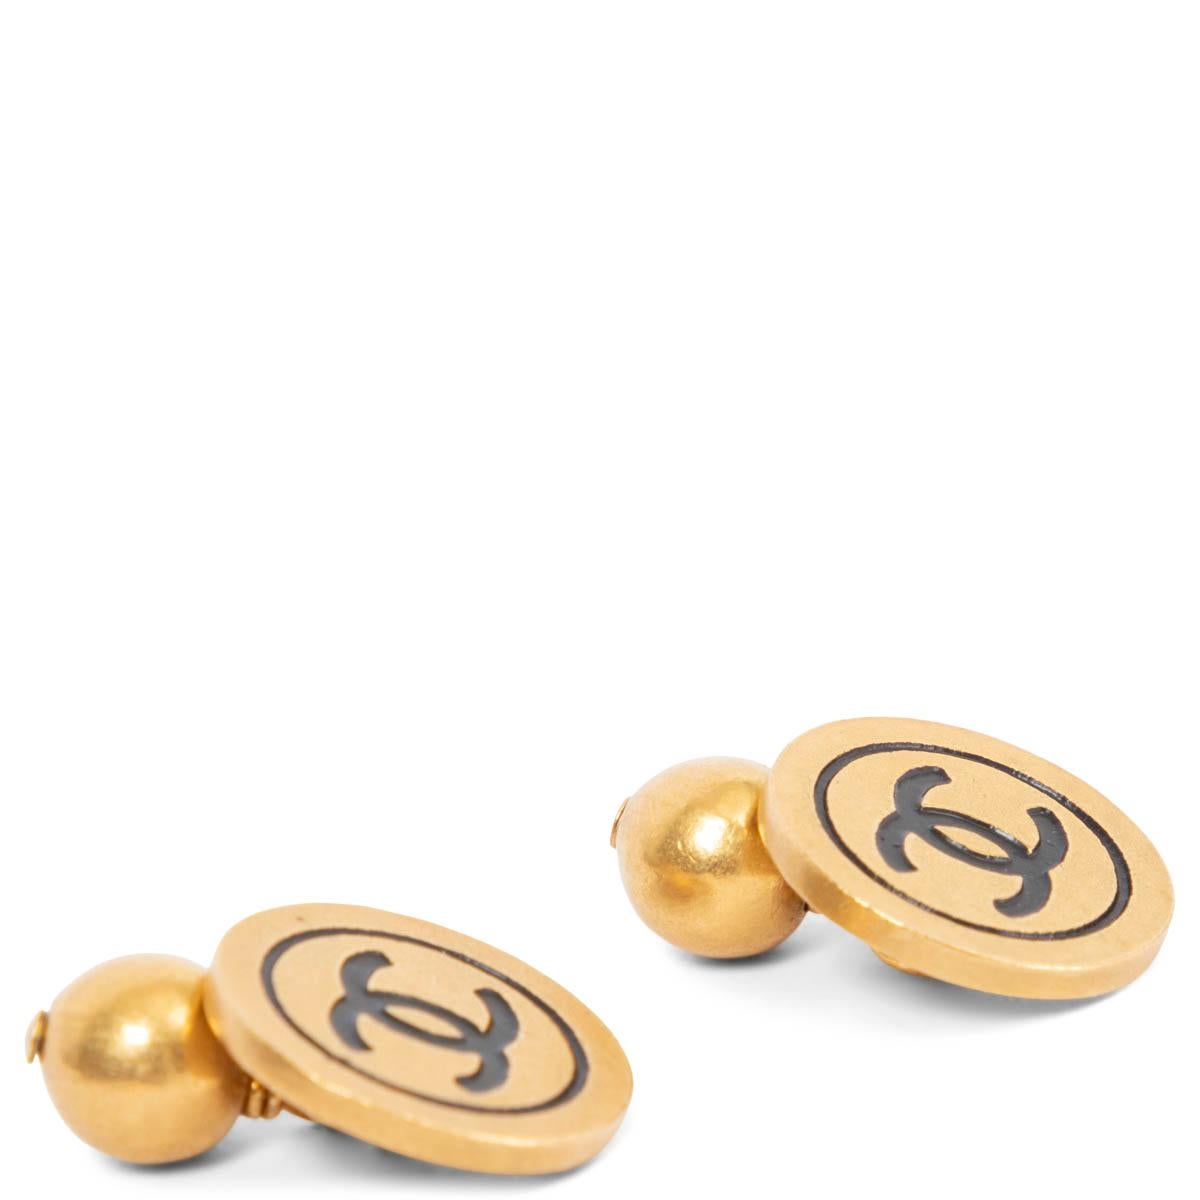 100% authentic Chanel 1994 CC cufflinks in antique gold plated metal. Have been carried and are in excellent condition. 

Measurements
Model	Chanel 
Width	2cm (0.8in)
Length	2cm (0.8in)

All our listings include only the listed item unless otherwise